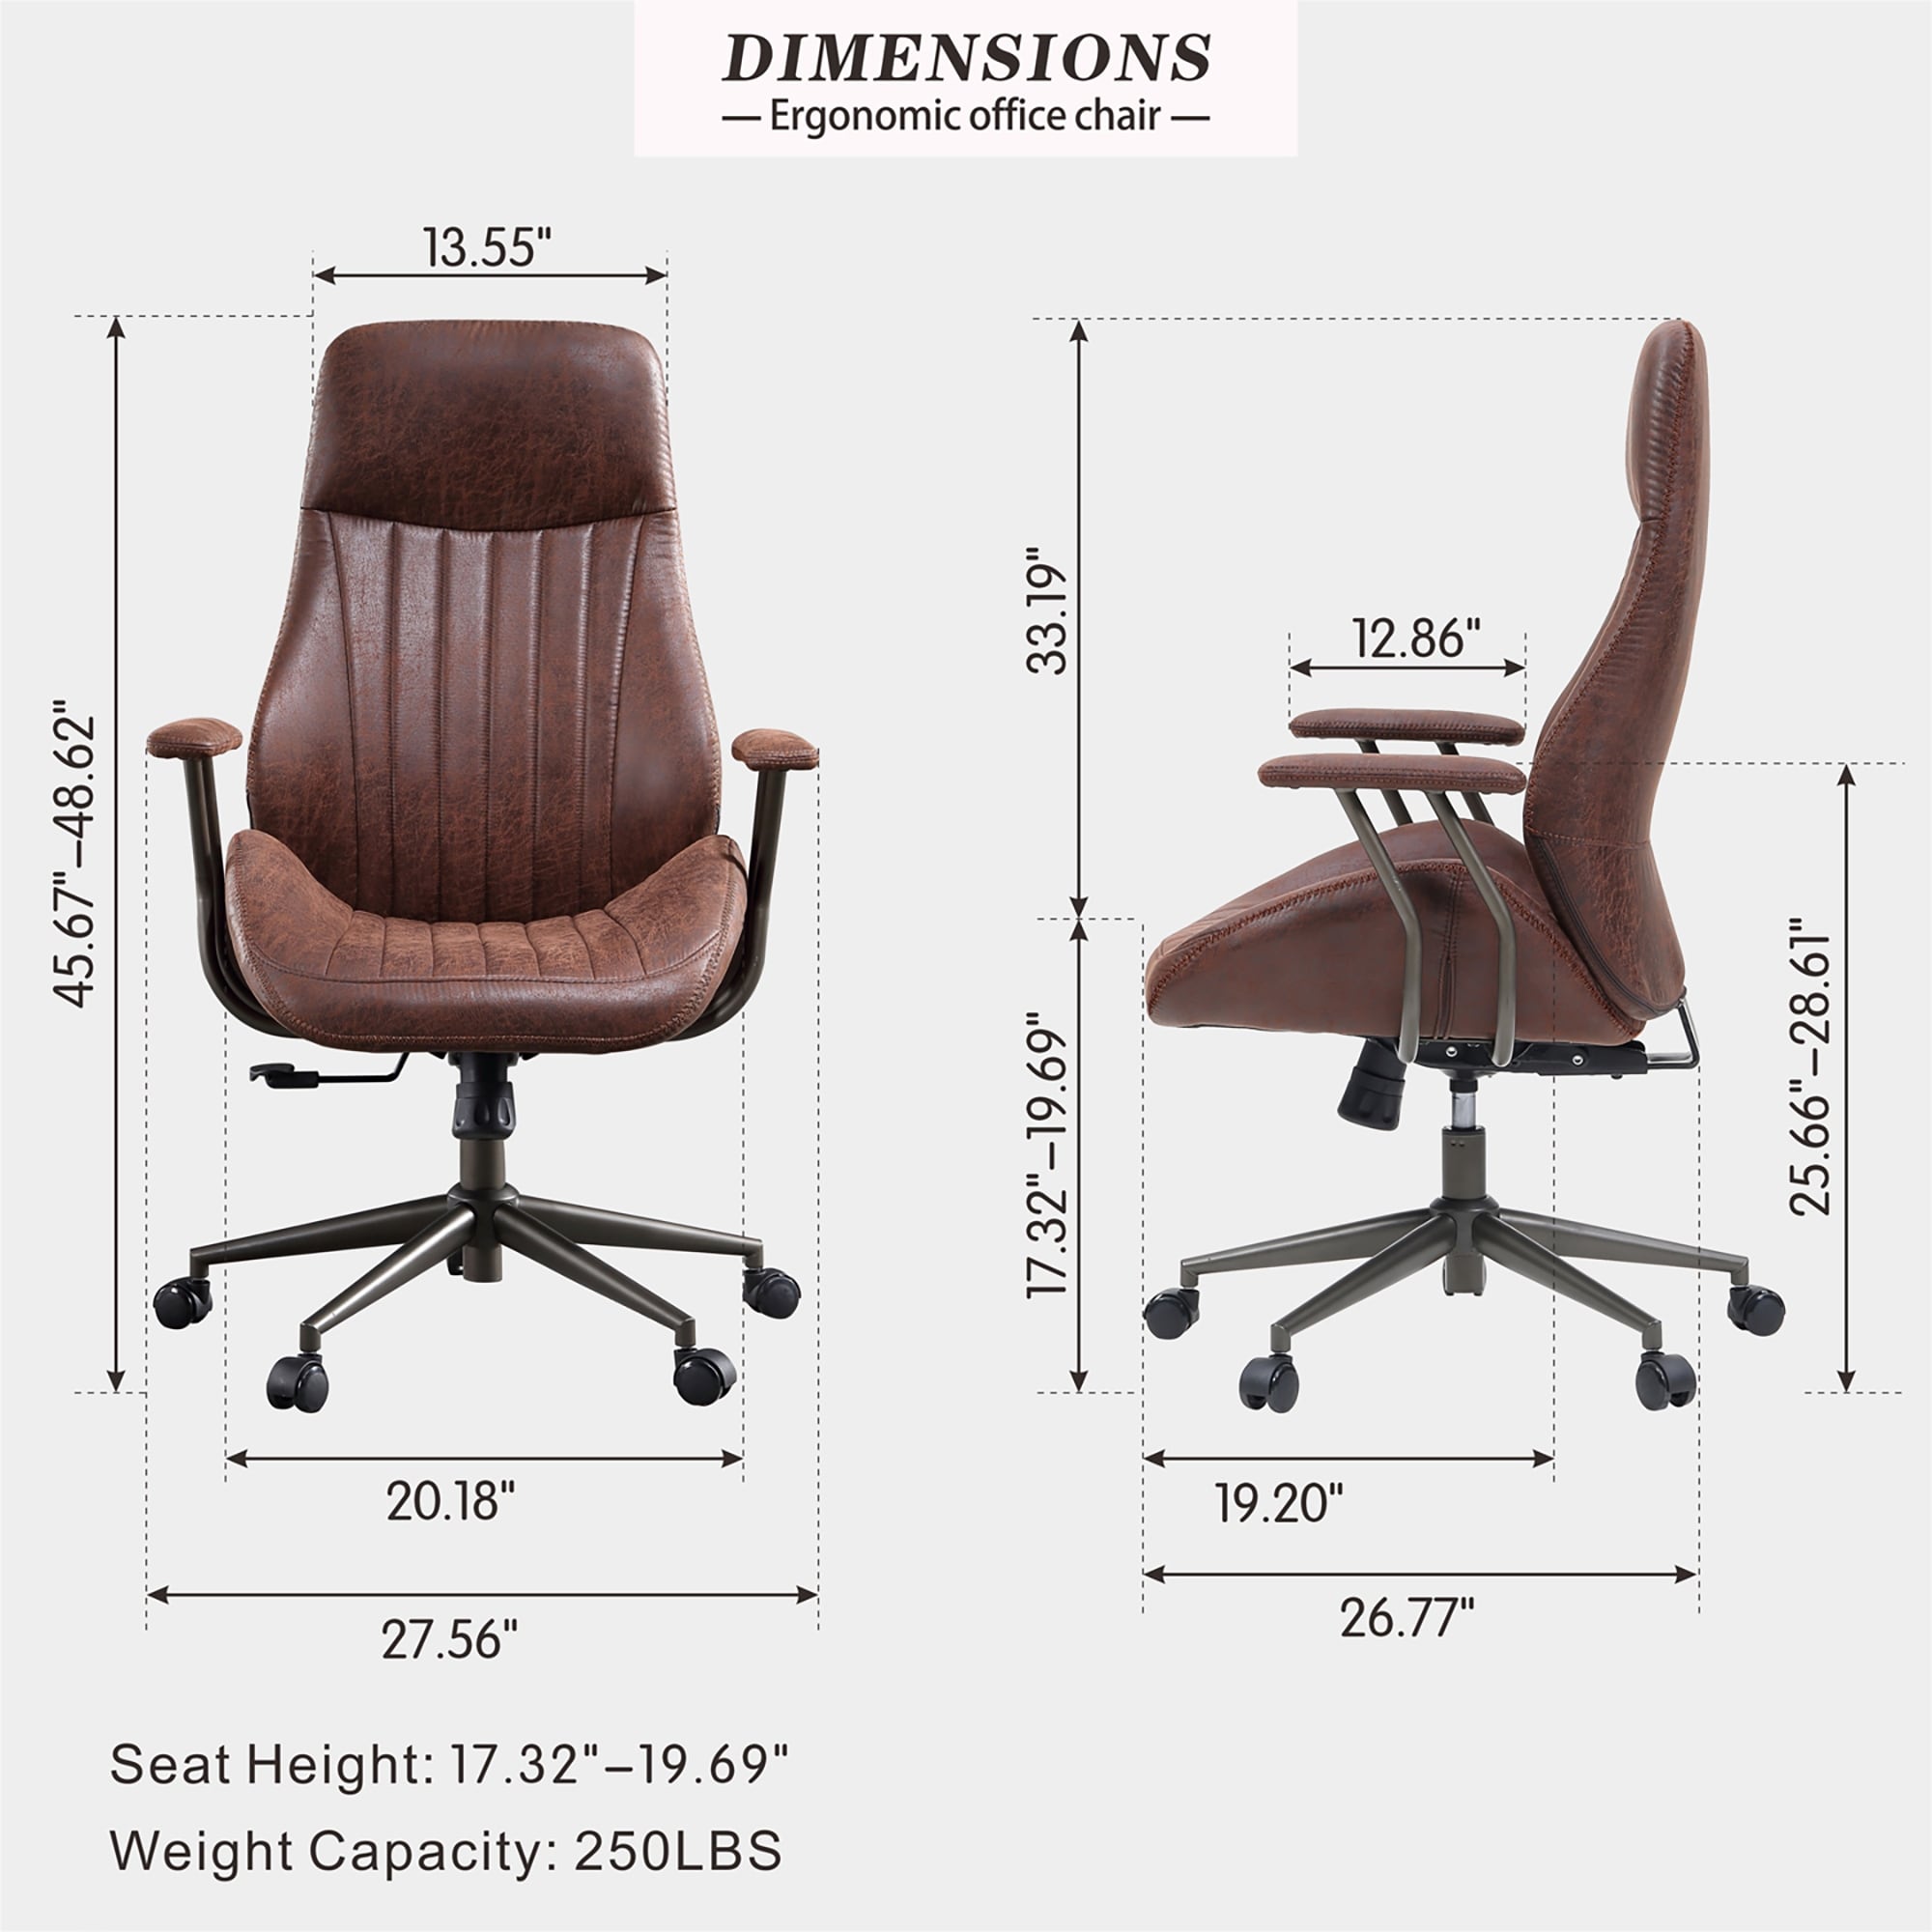 OL Dark Brown Suede Fabric Ergonomic Swivel Office Chair Task Chair with  Recliner High Back Lumbar Support